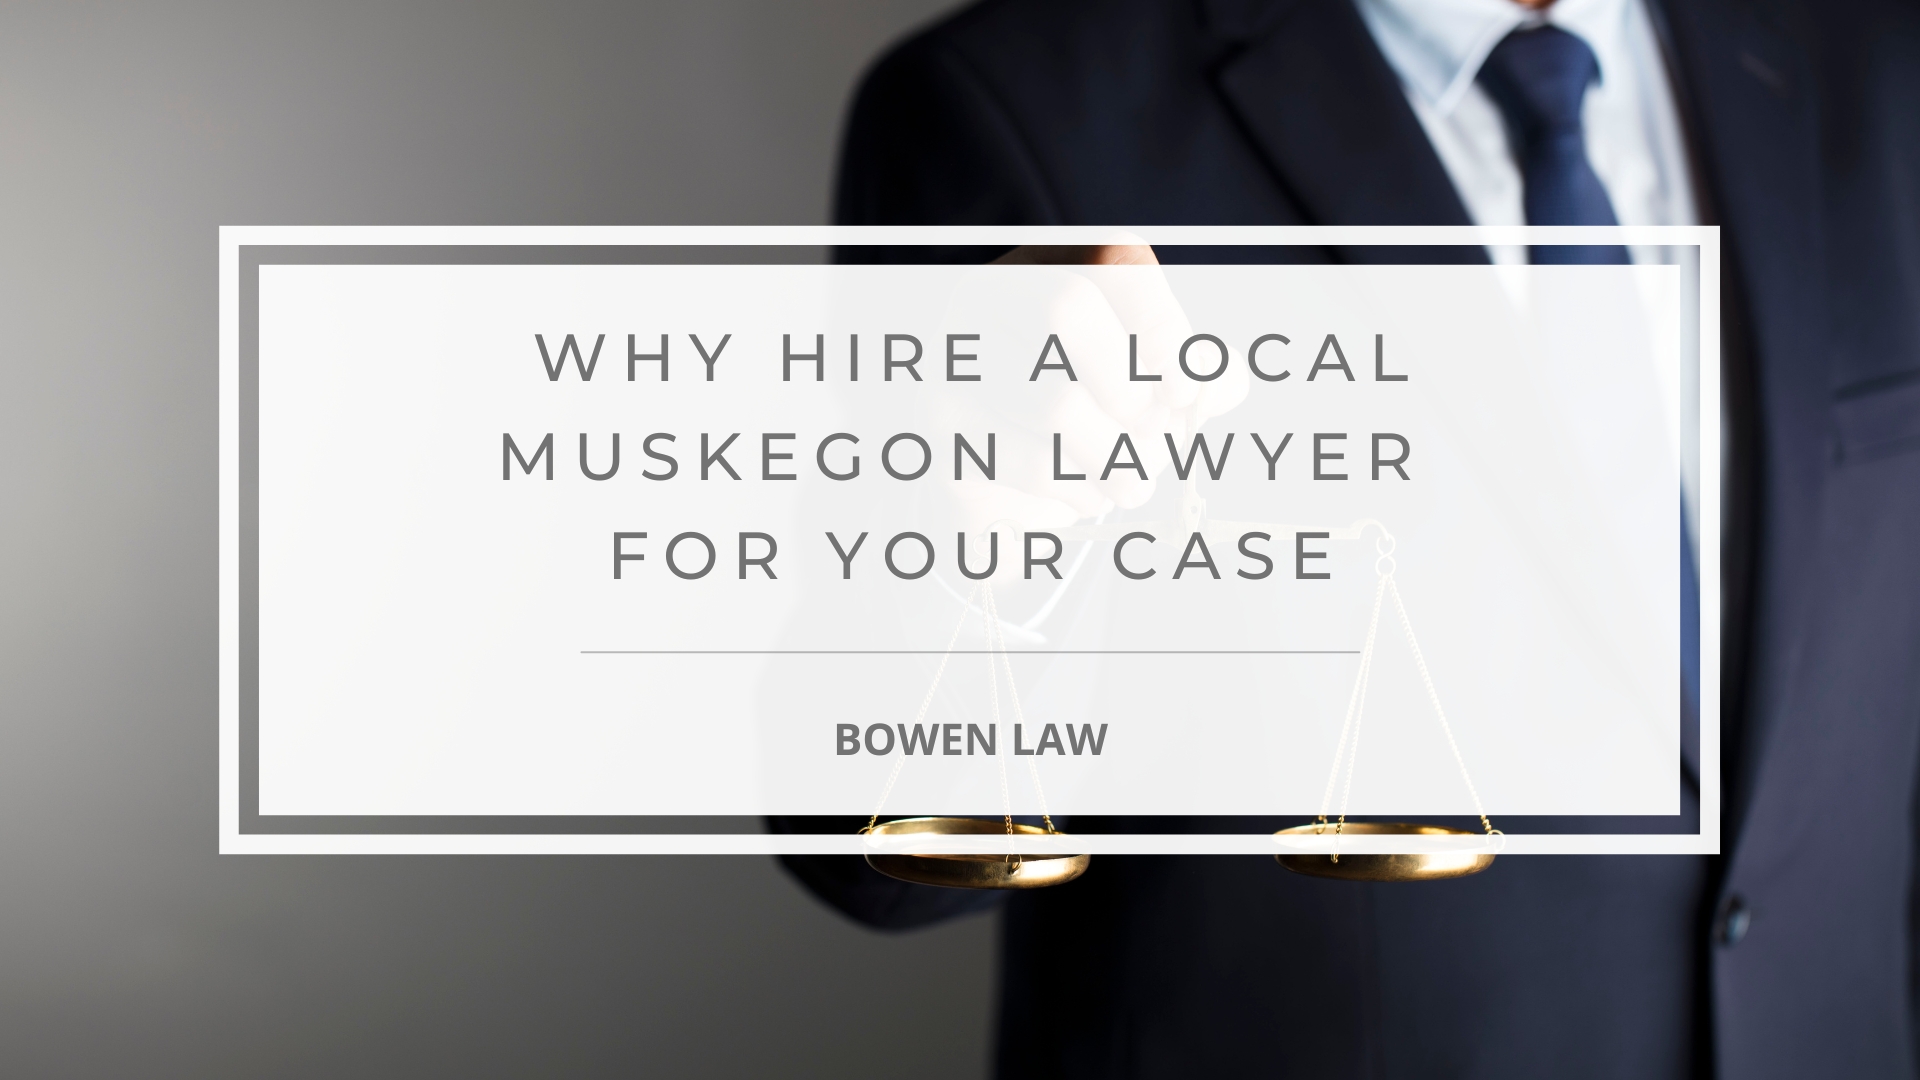 Featured image of why hire a local muskegon lawyer for your case